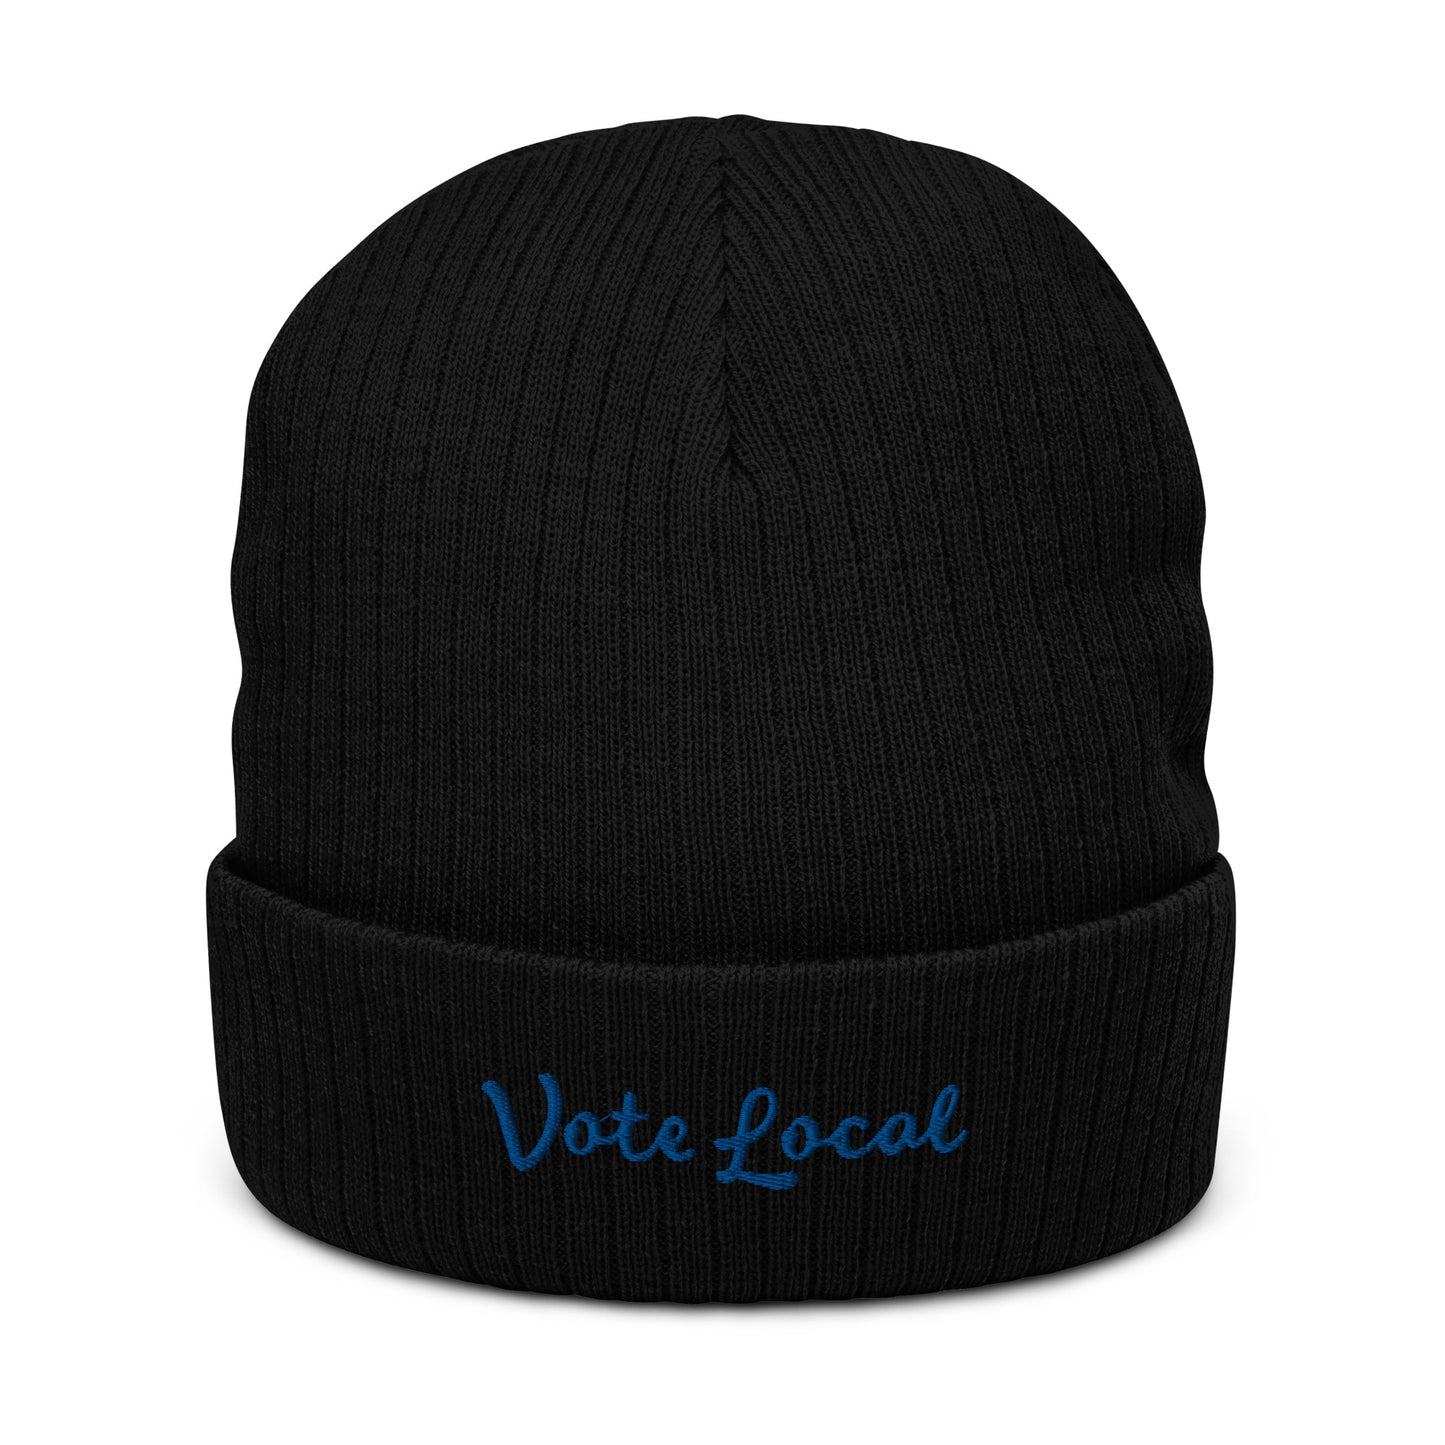 Vote Local Ribbed knit beanie